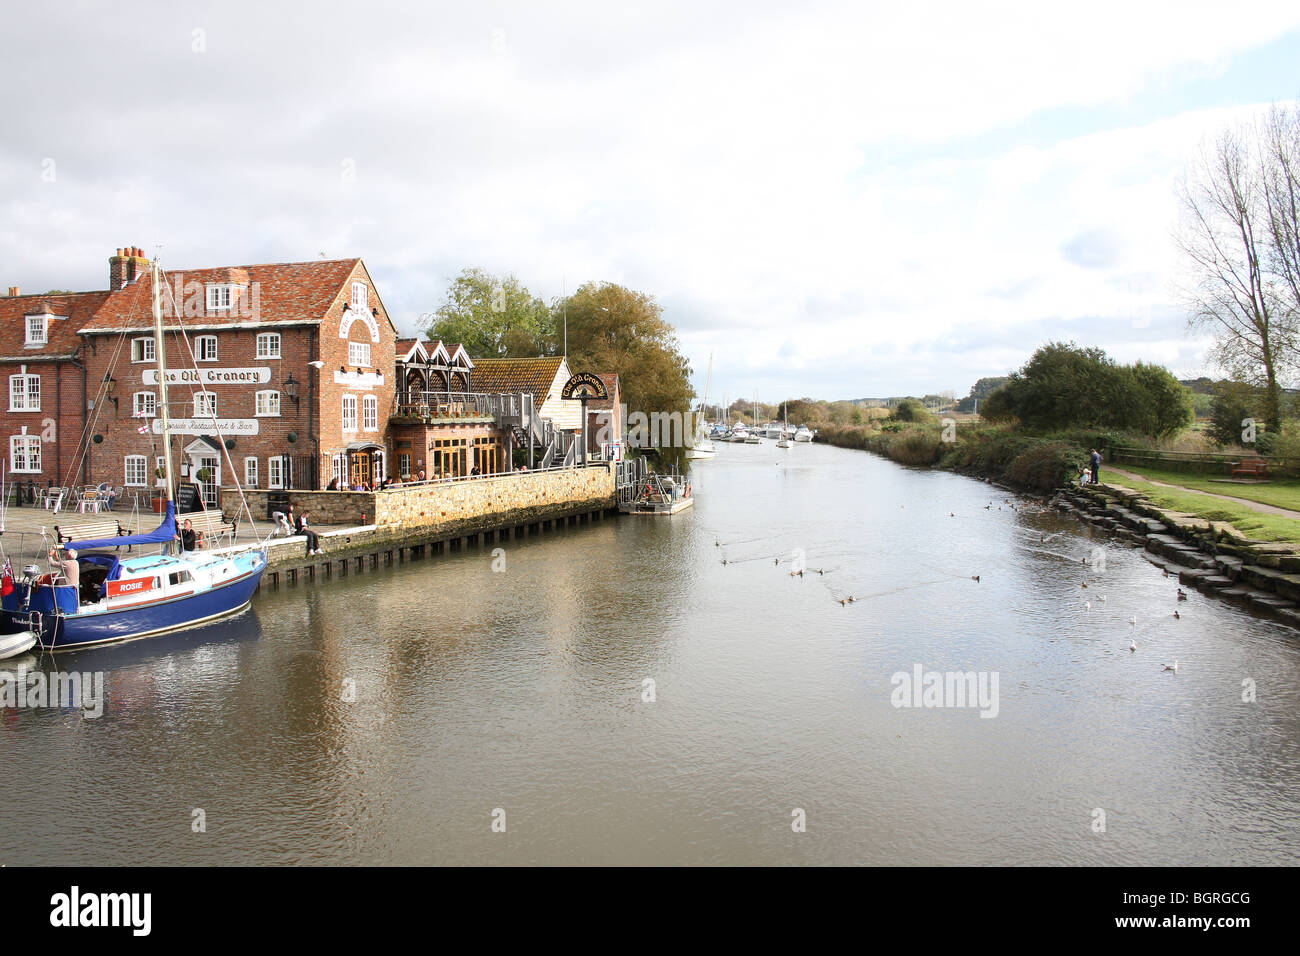 The River Frome in Dorset, England. Stock Photo